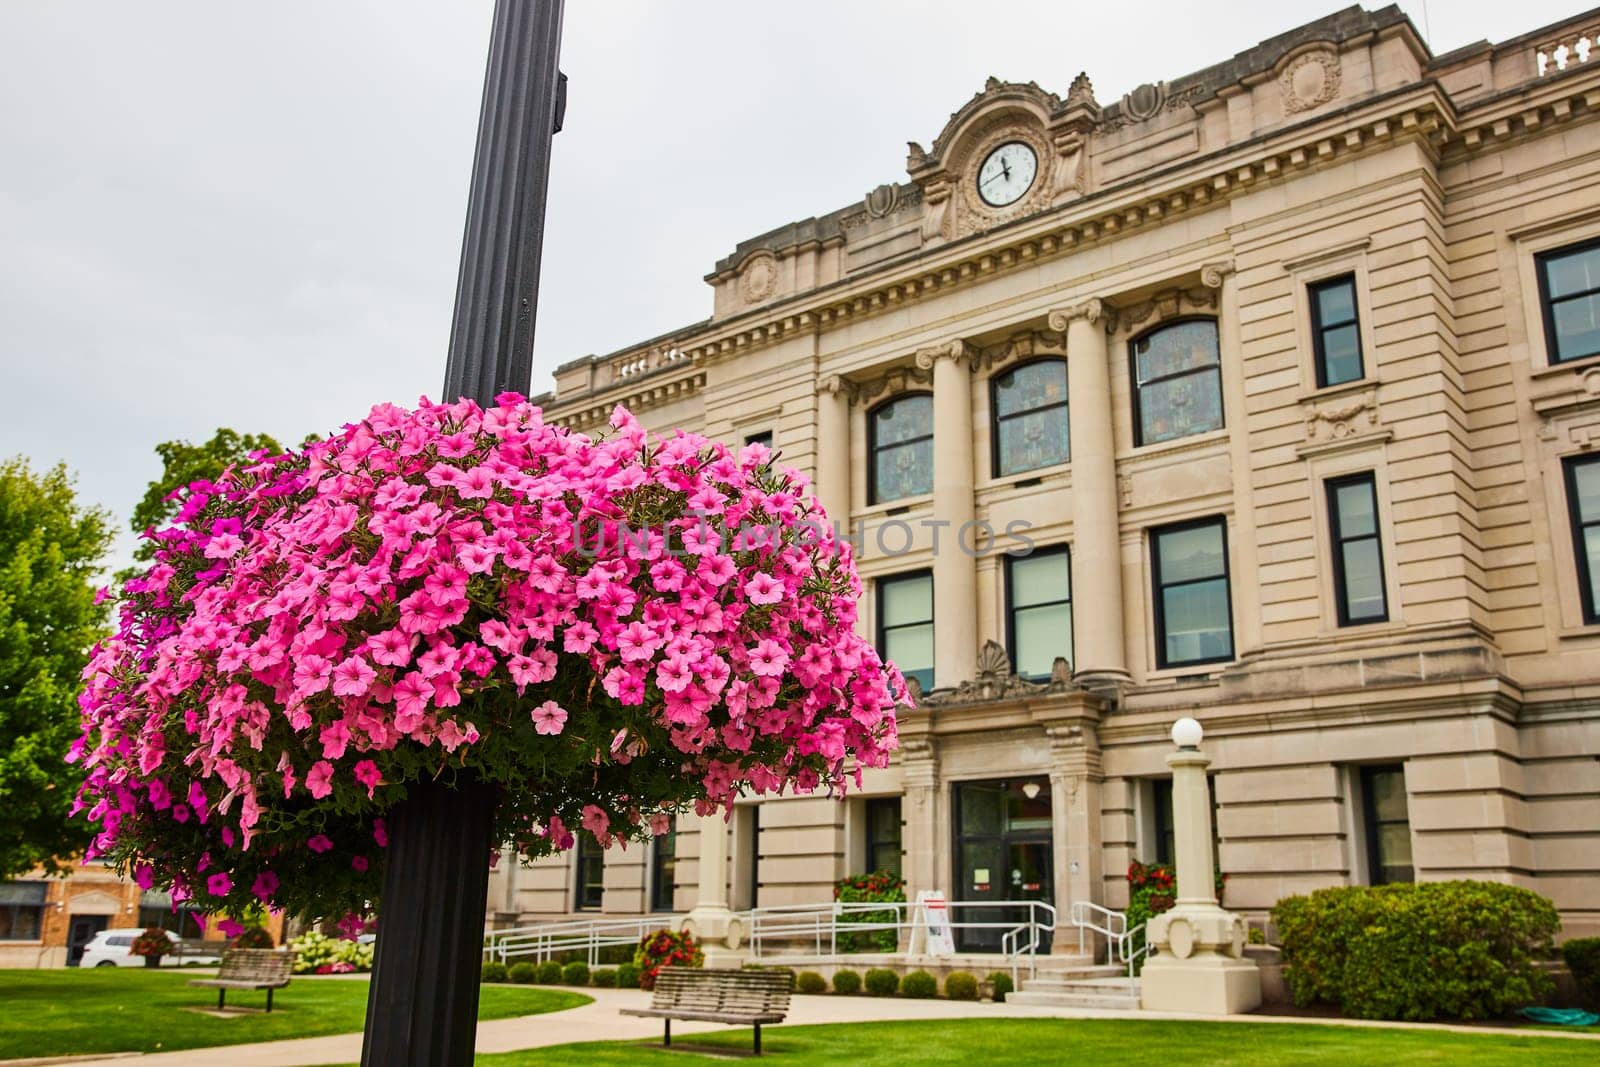 Image of Pretty pink flowers hanging on black pole in front of Auburn courthouse